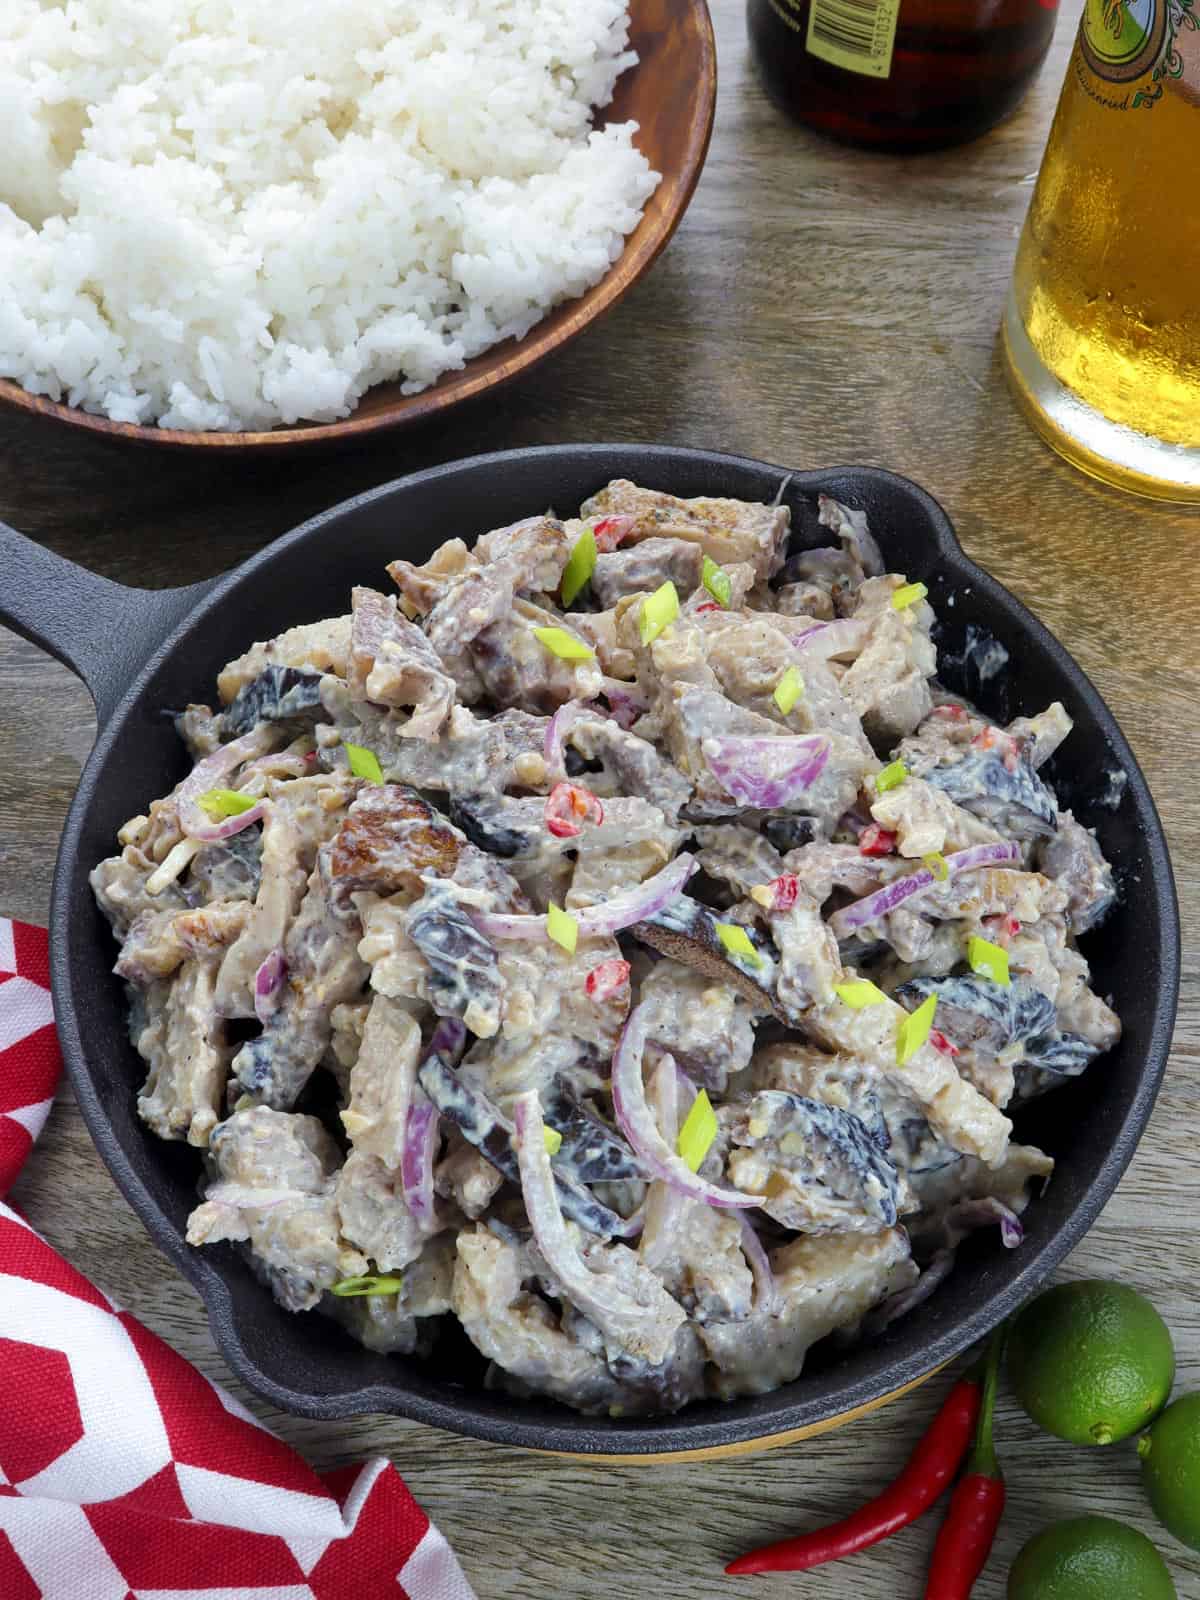 Dinakdakan in a cast iron skillet with a bowl of steamed rice on the side and a glass of beer